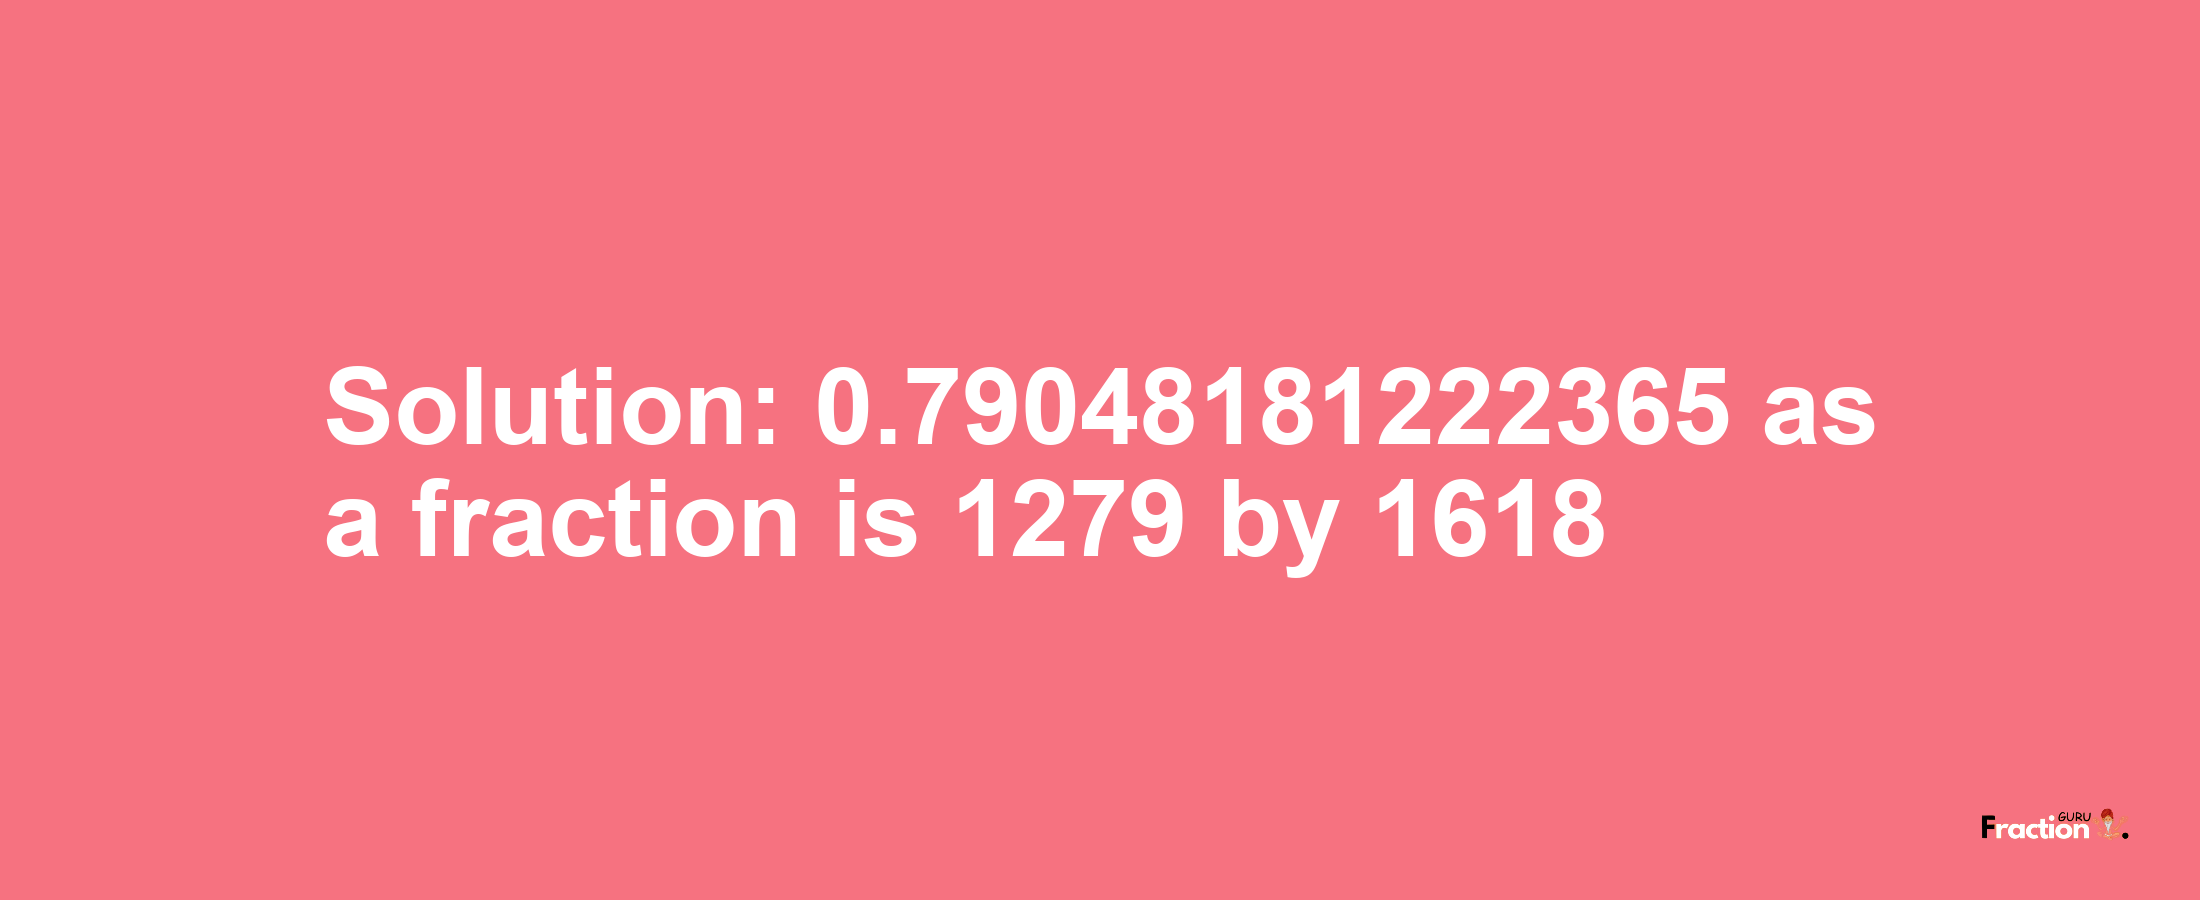 Solution:0.79048181222365 as a fraction is 1279/1618